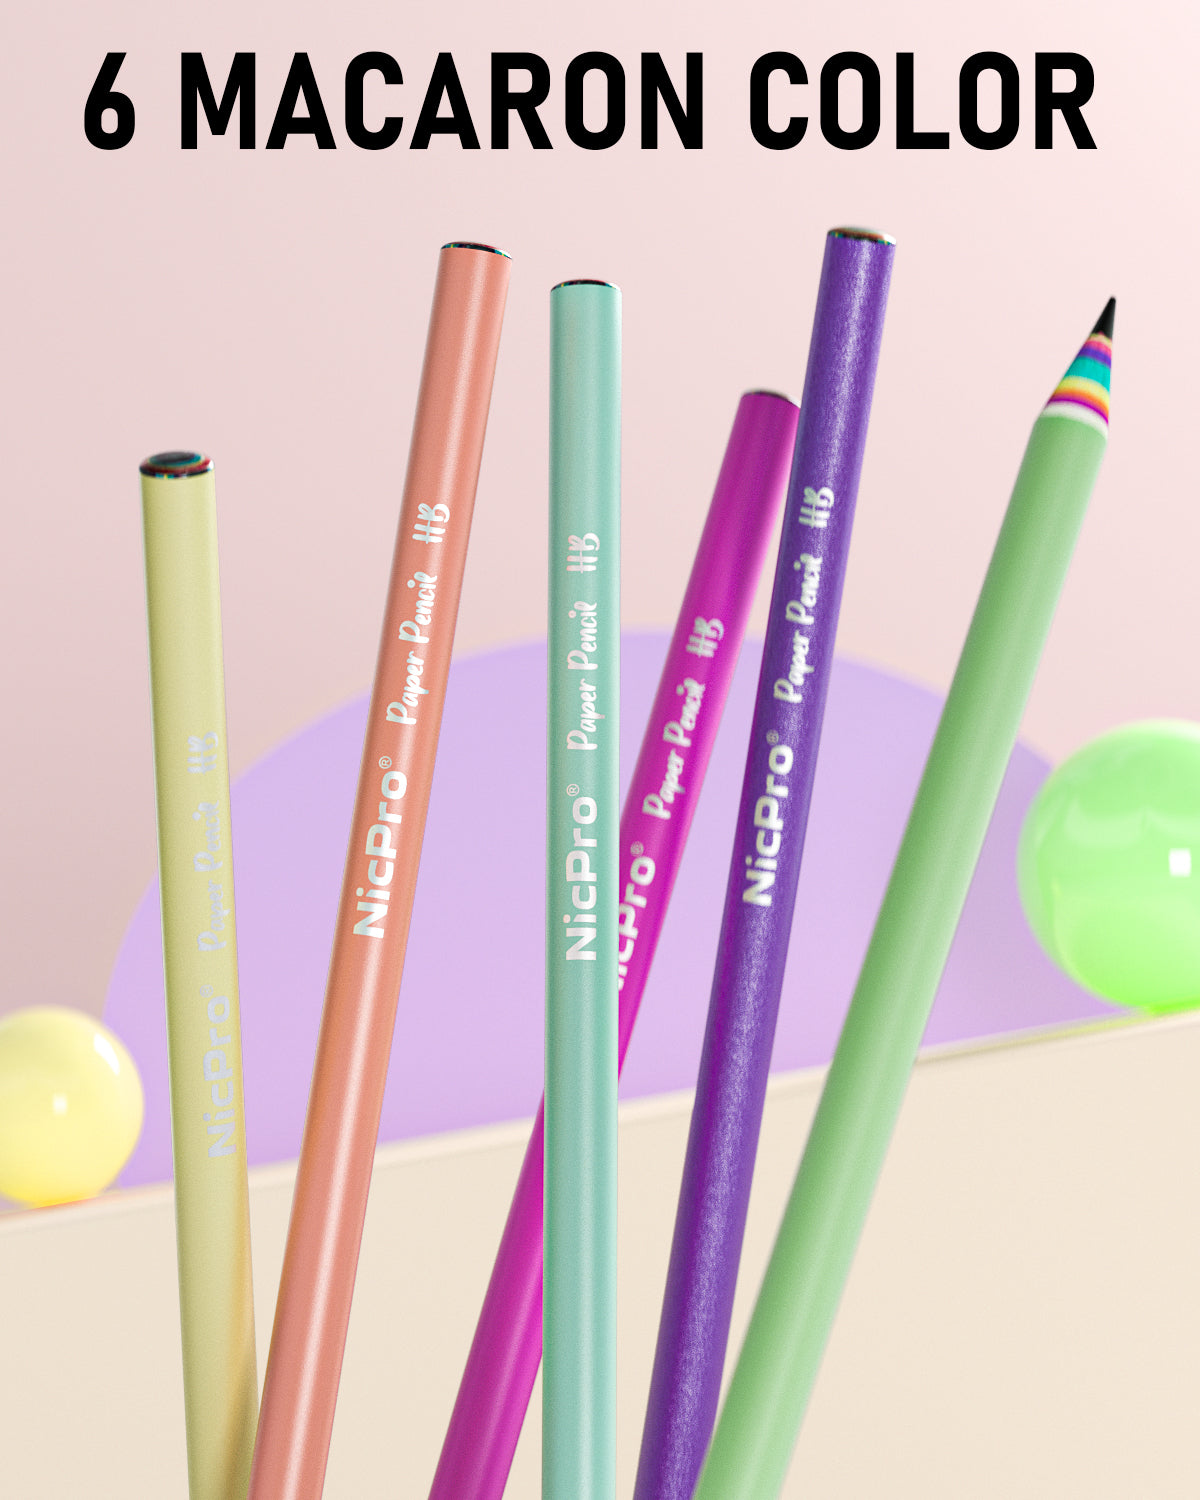 NOGIS 12 Pack Cool Pencils for Kids,Rainbow Pencils #2 HB Pencils for  School,Office Eco-Friendly Wood & Plastic,Pre-Sharpened Pencils for Kids